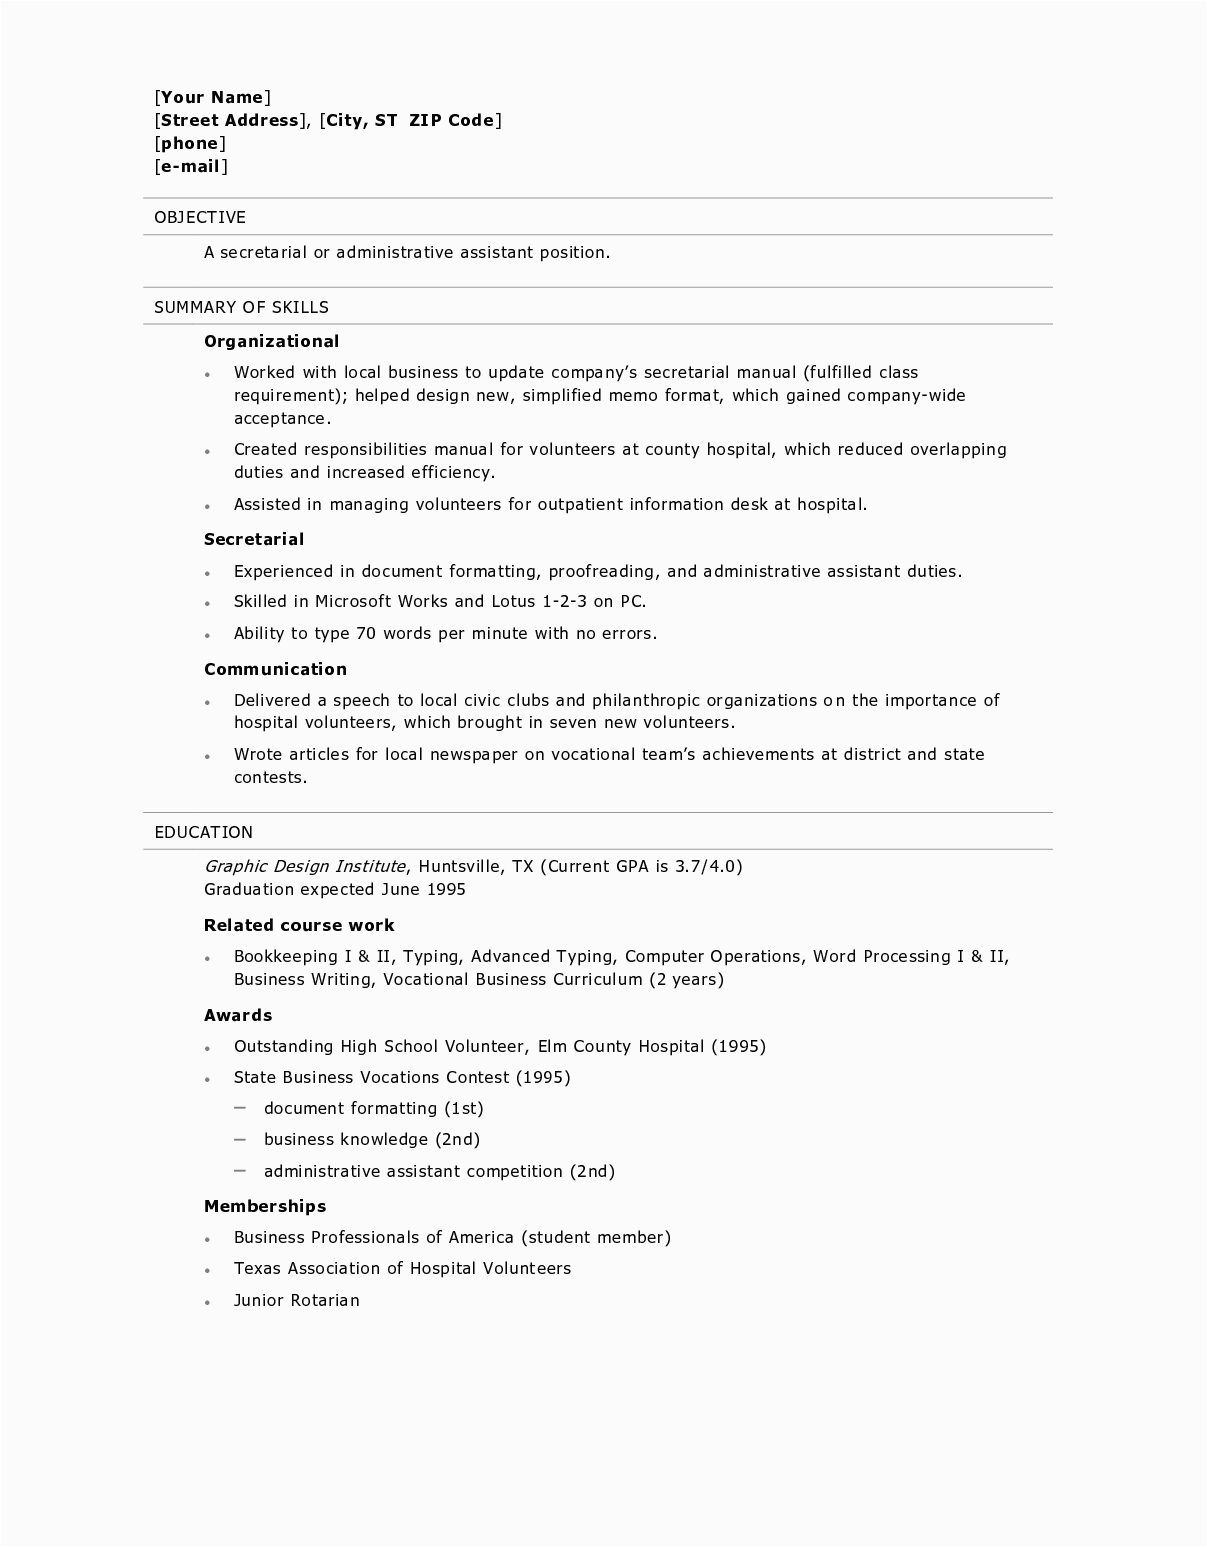 Free Resume Template for High School Graduate Resume Examples for High School Graduate